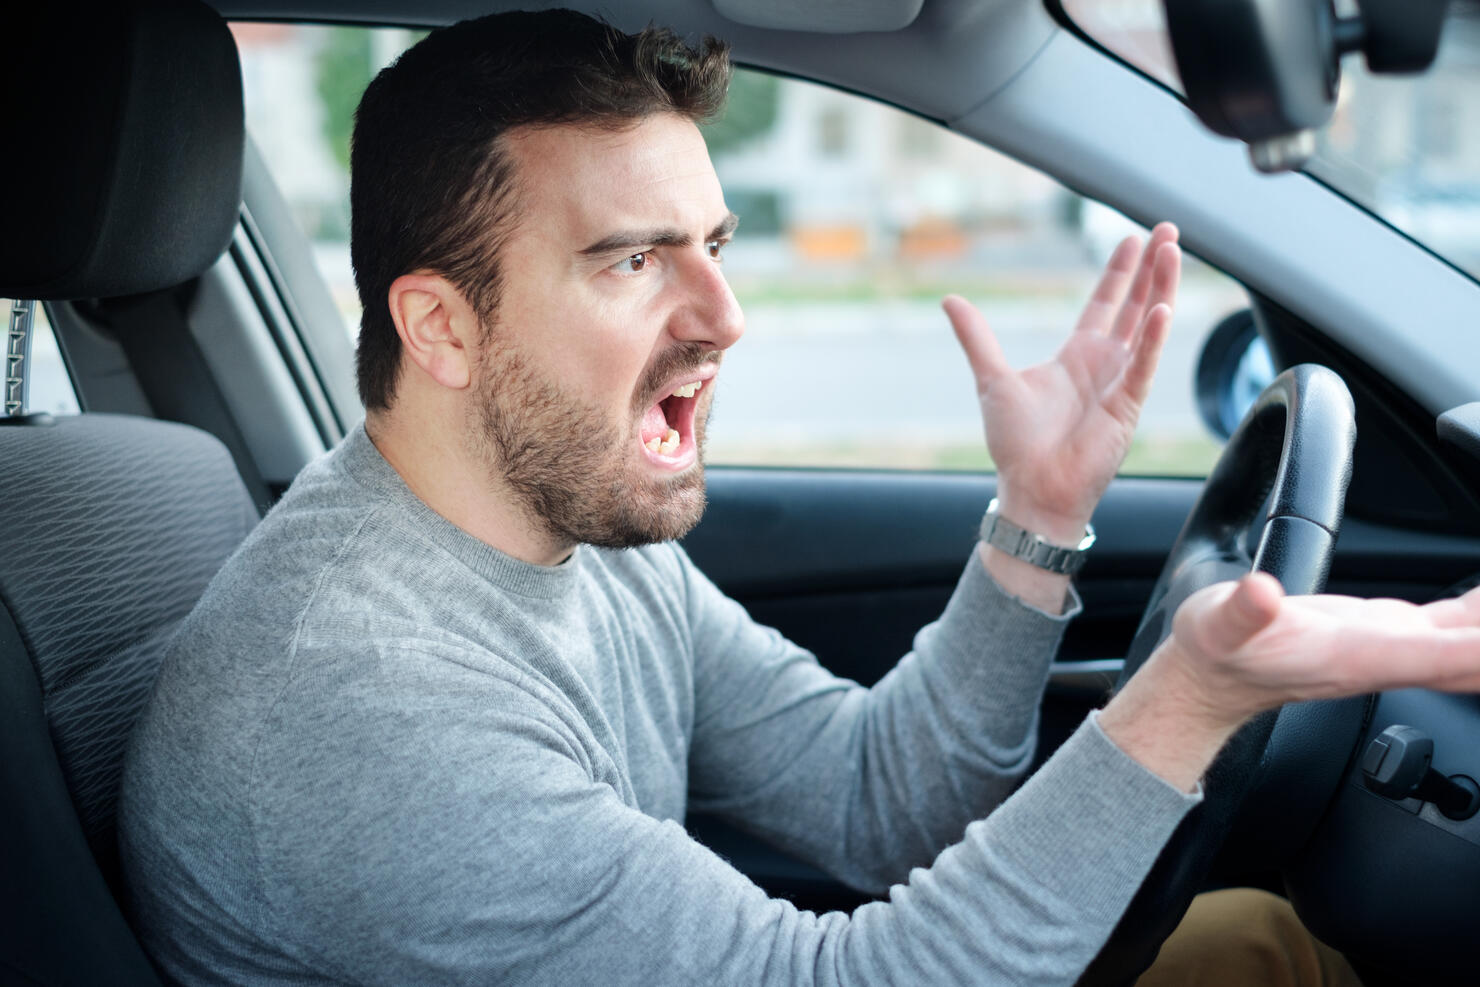 Face expression of angry driver arguing and gesturing